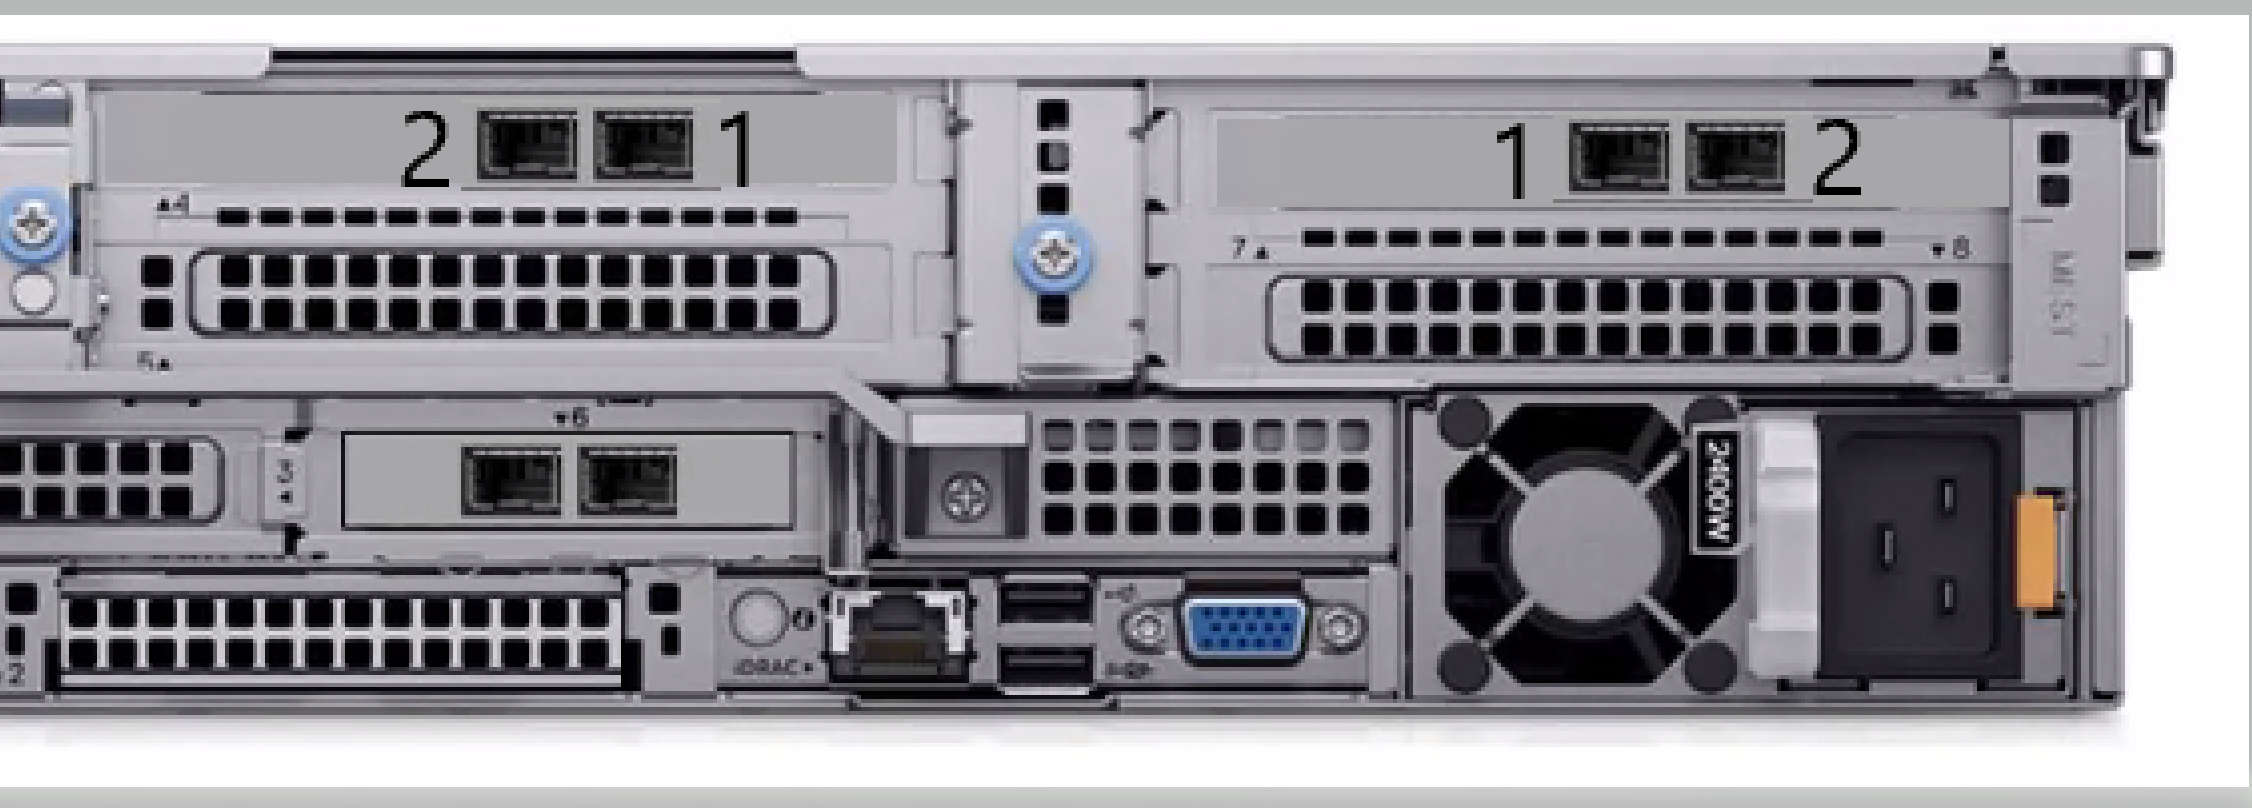 Image showing PCIe slots